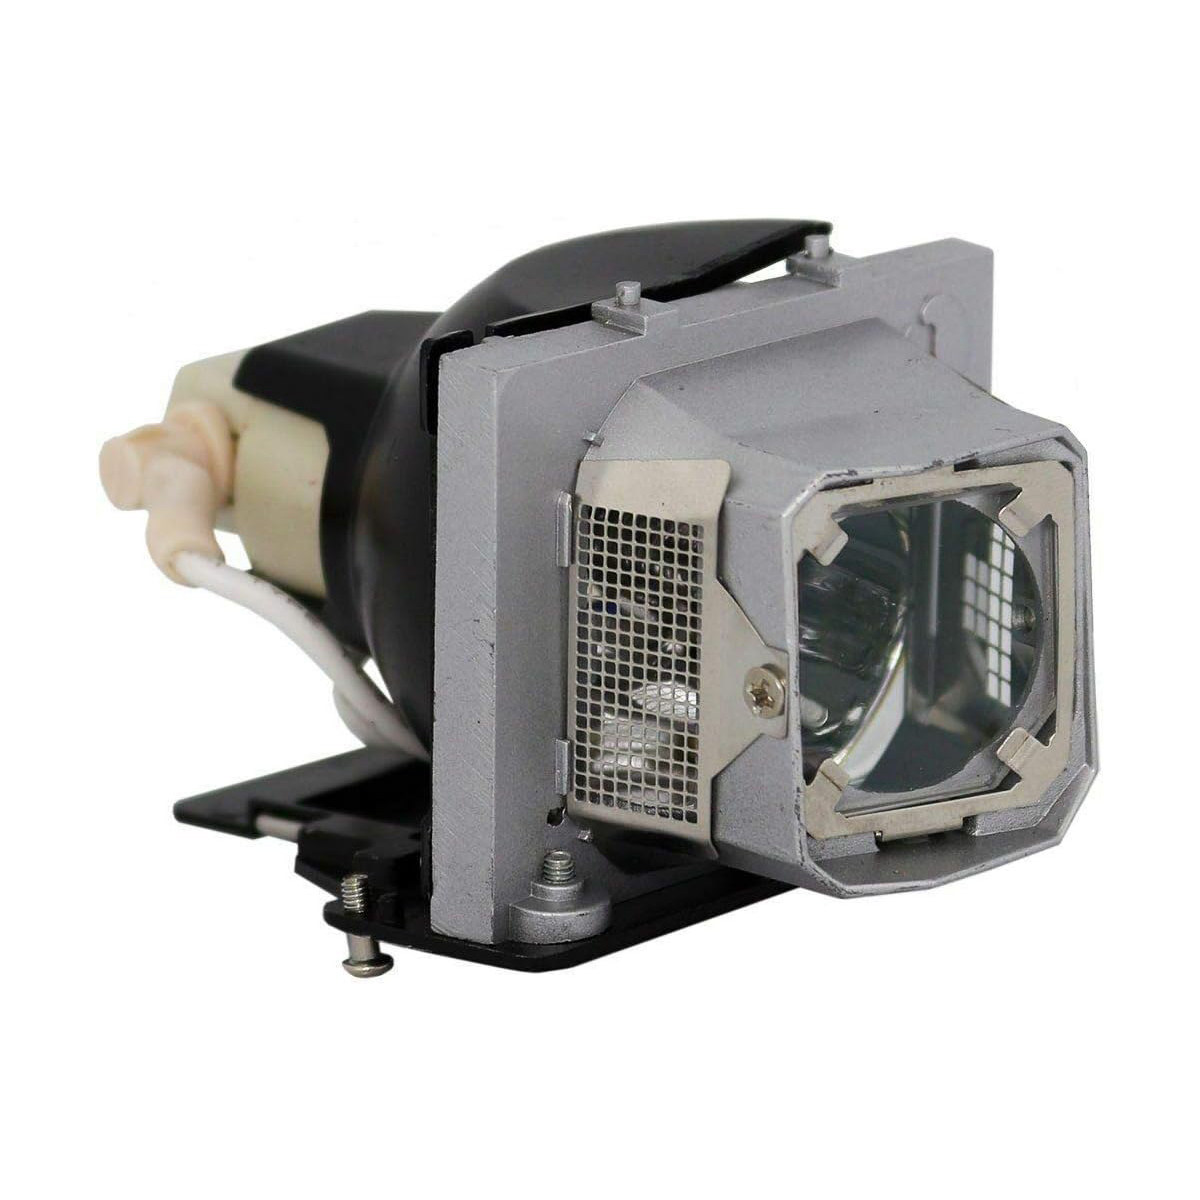 Replacement Projector lamp BL-FP165A For OPTOMA EW33 EX330 TW330 TX330